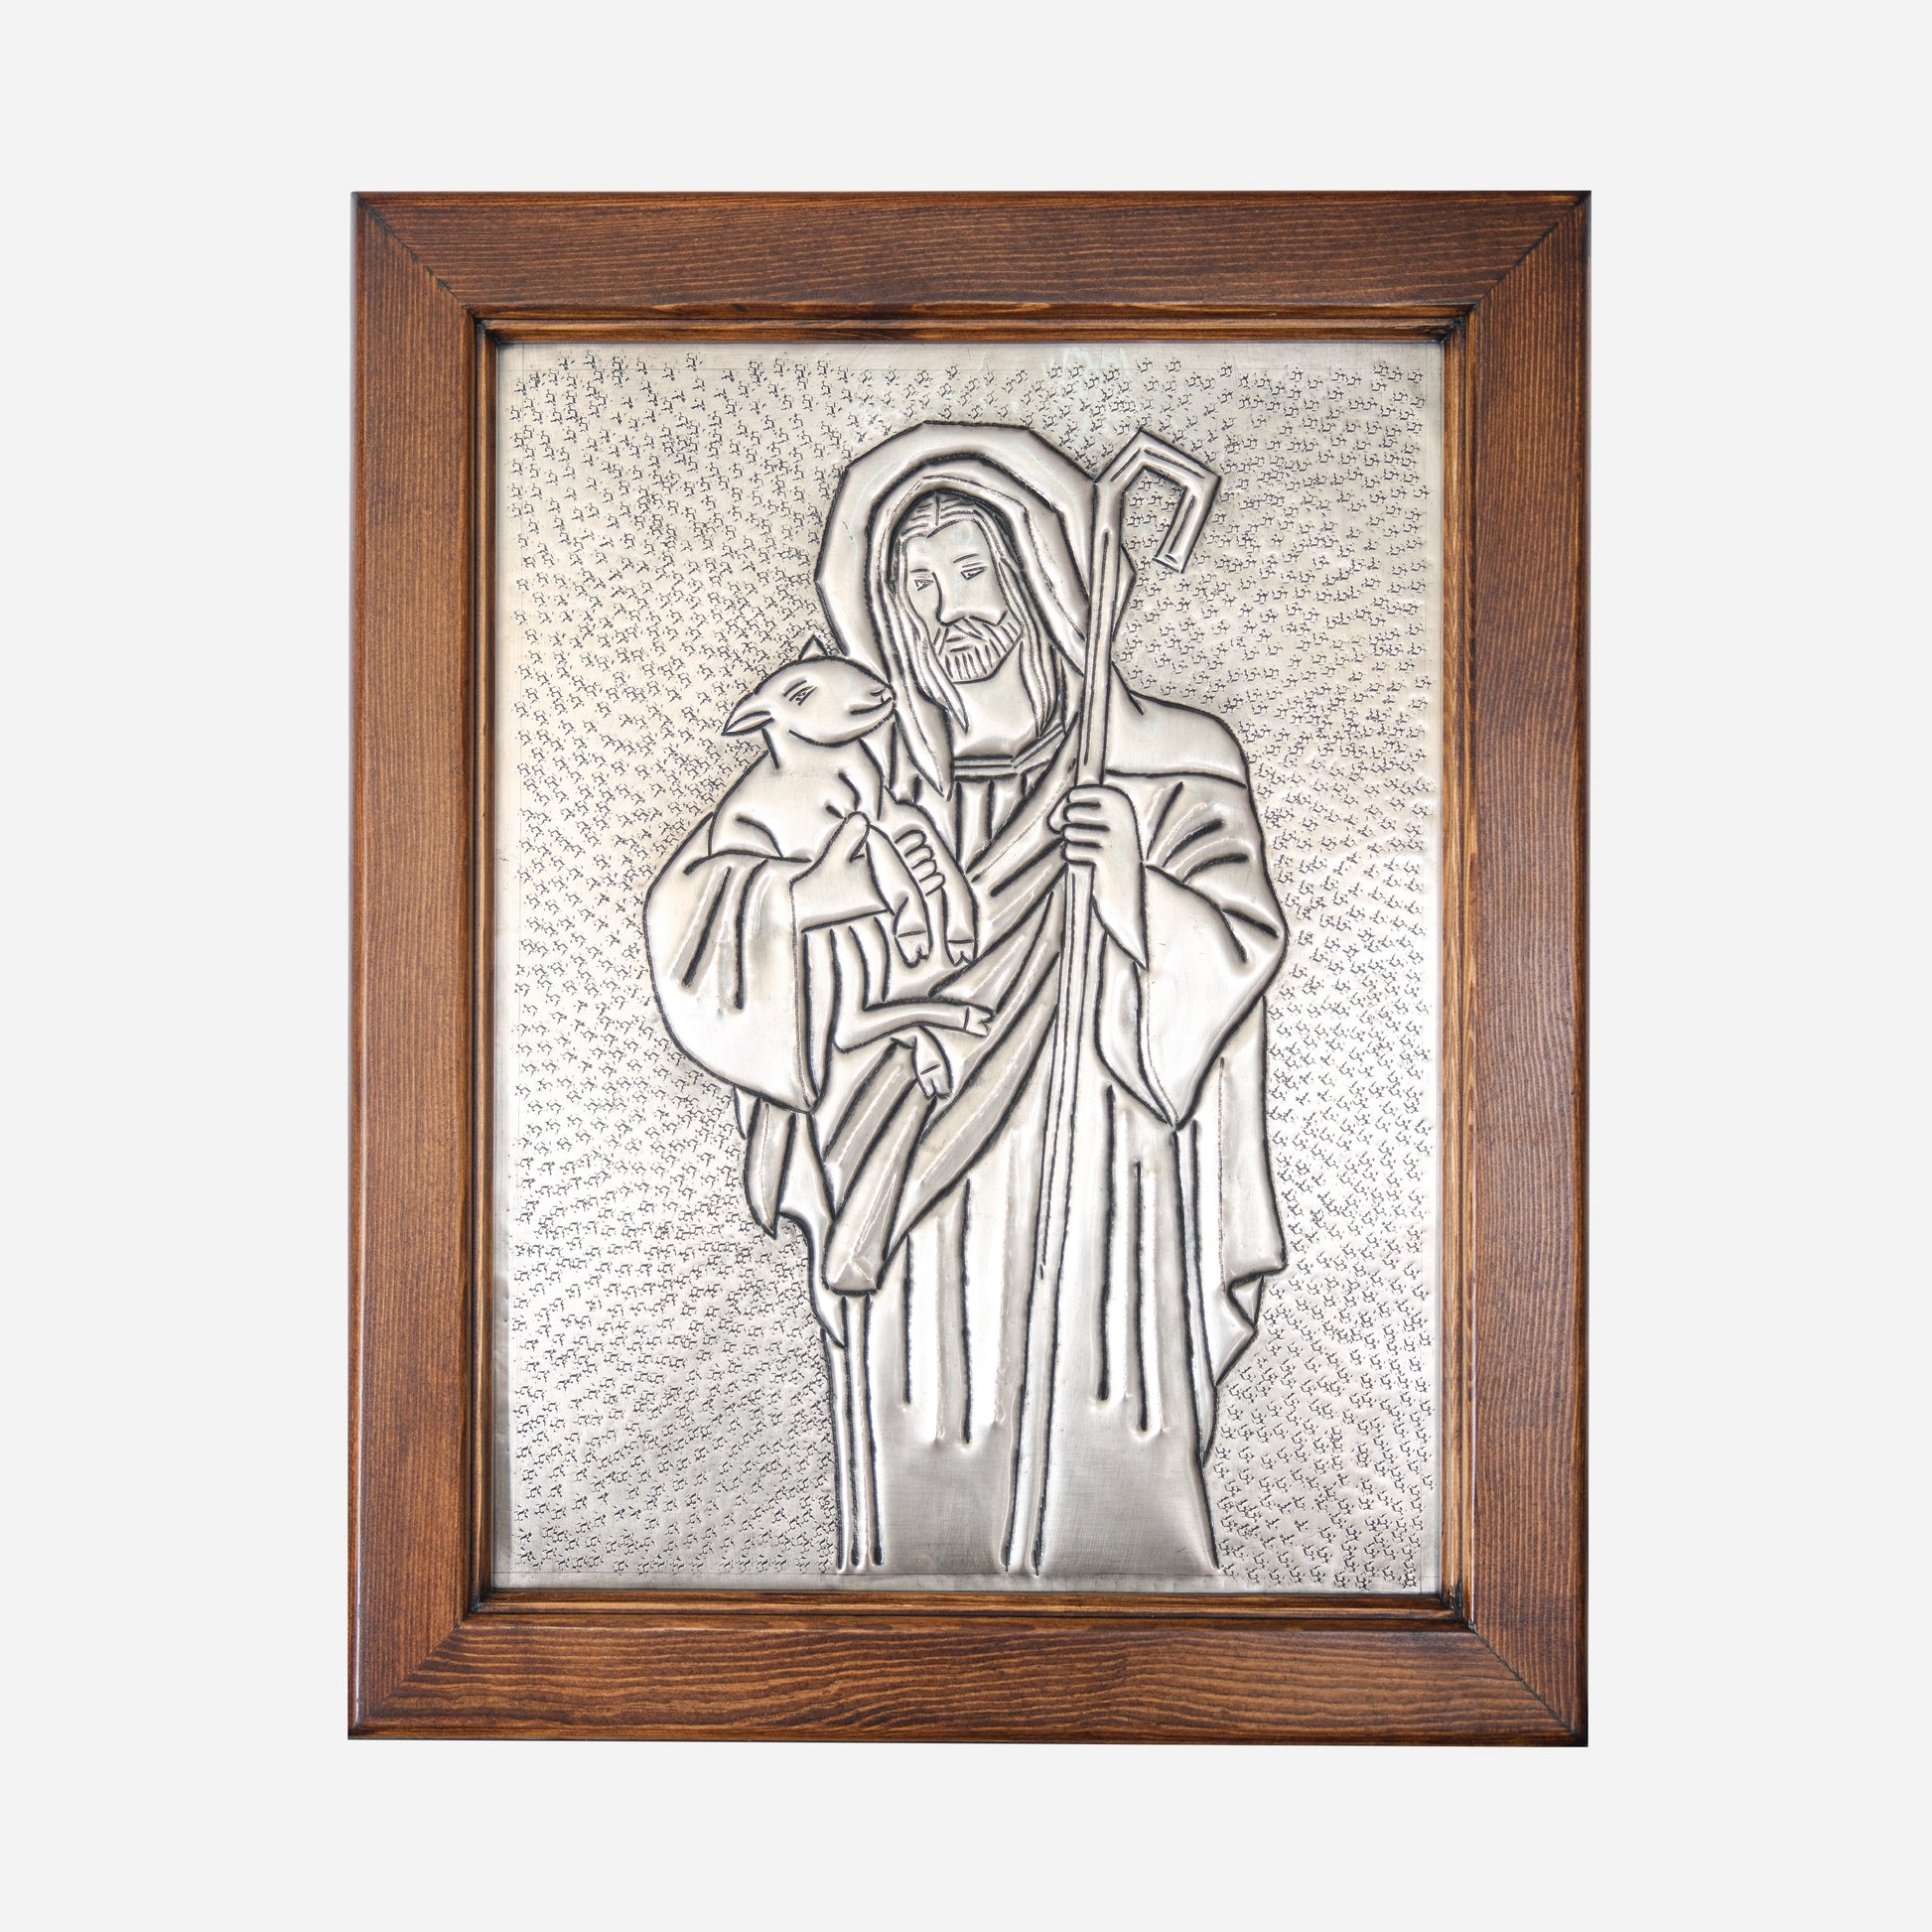 Framed Copper Artwork (Parable of the Lost Sheep)